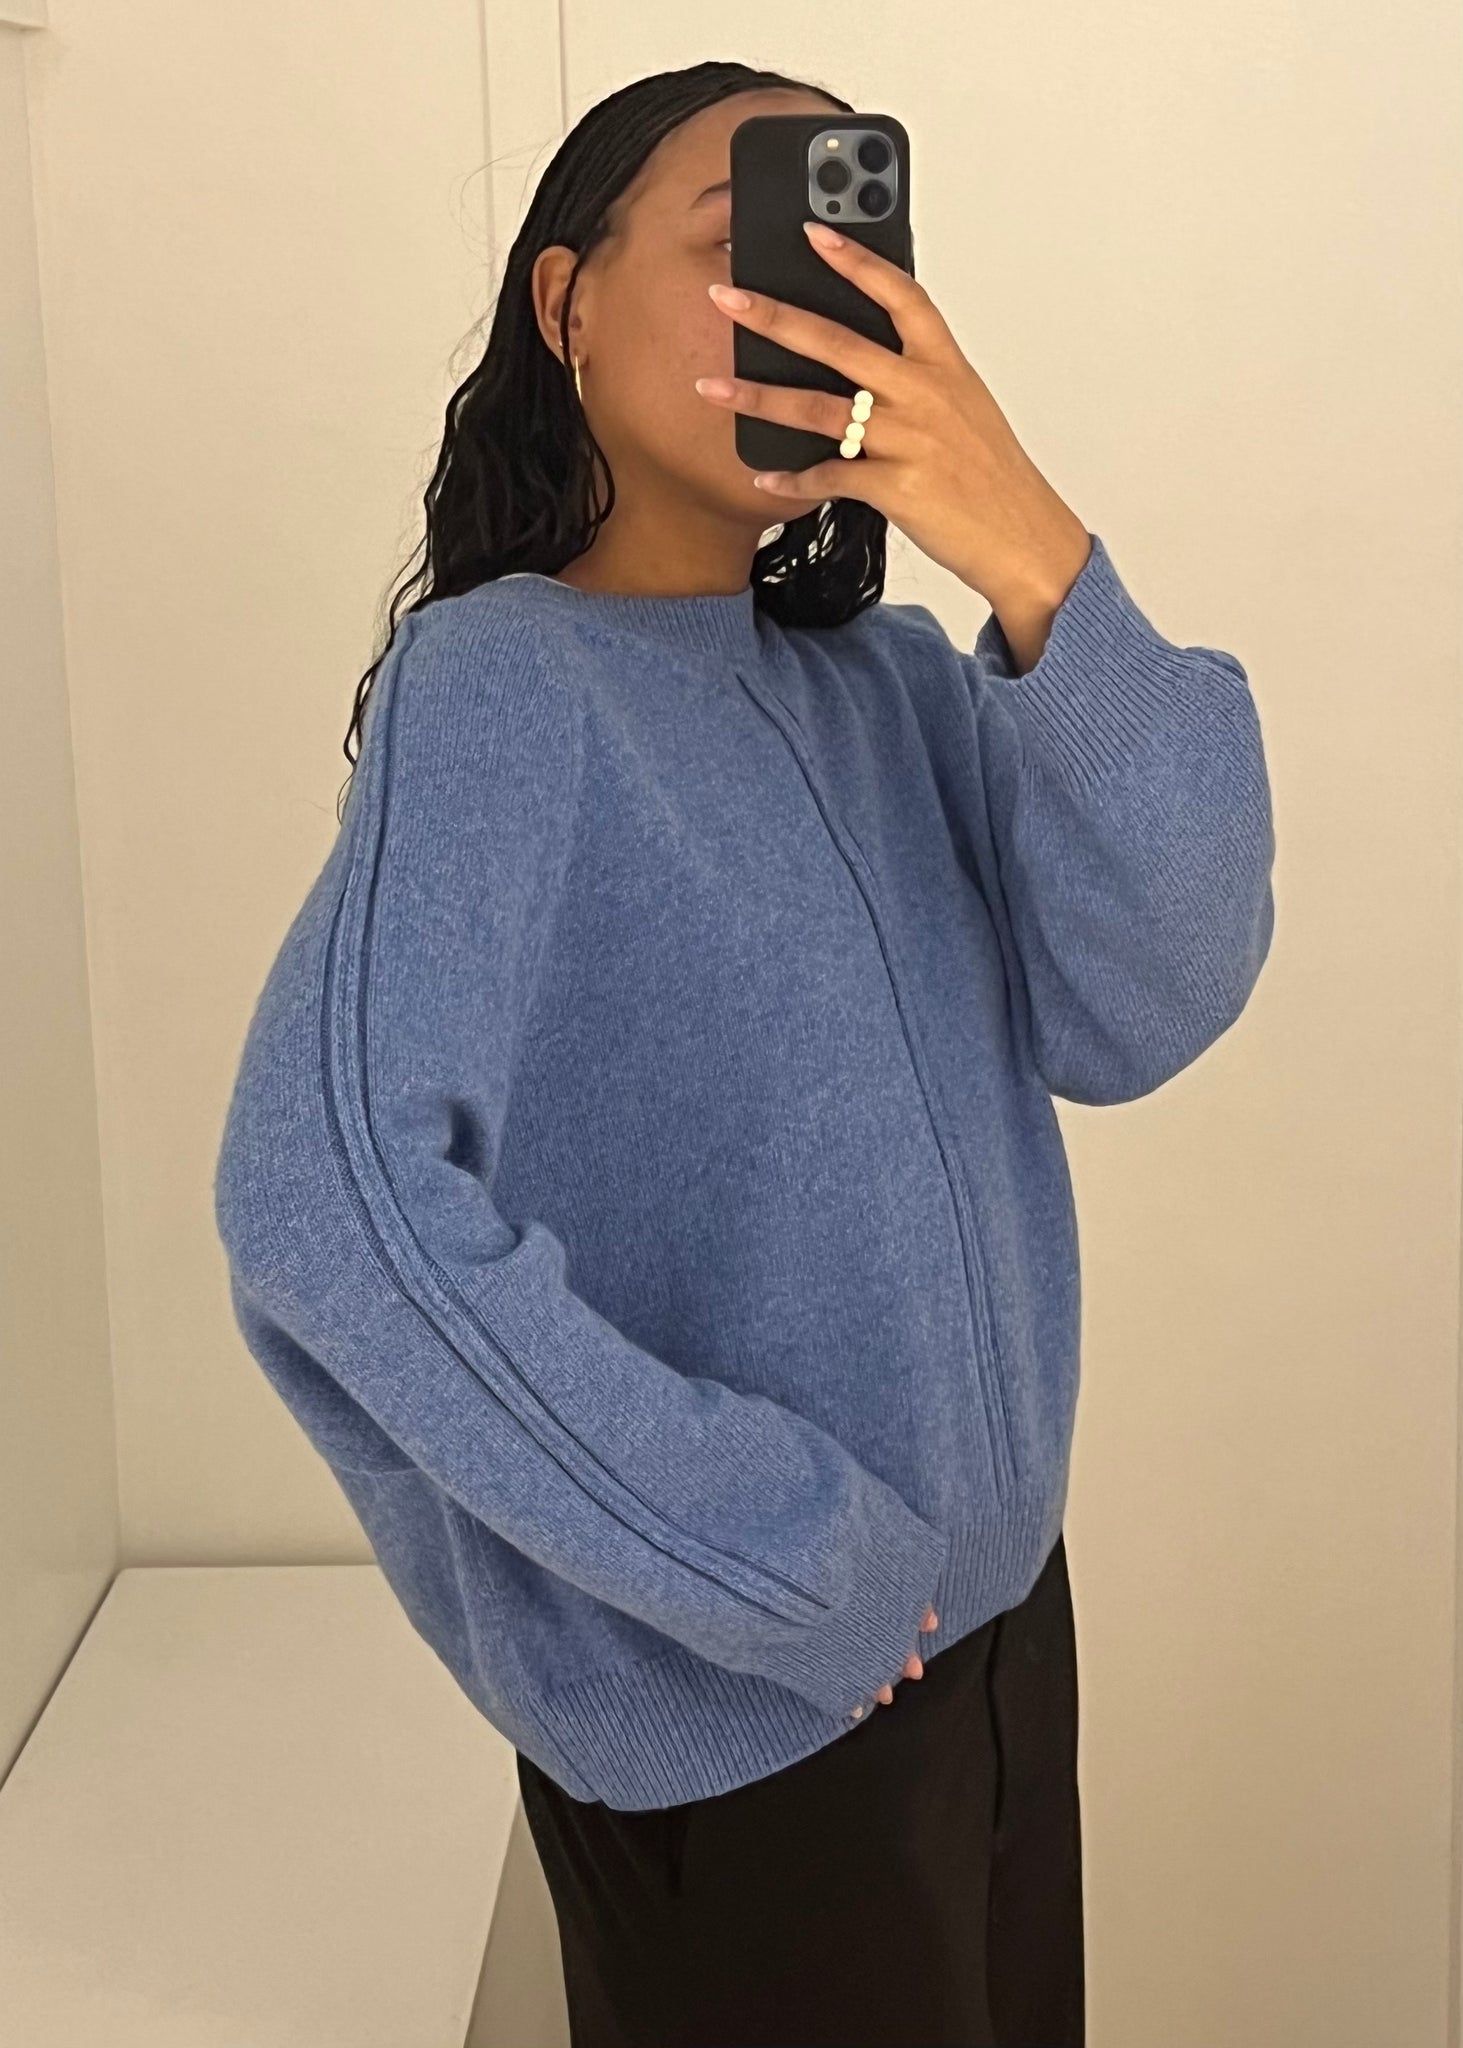 Nele cashmere knit in azzurro blue by can pep rey